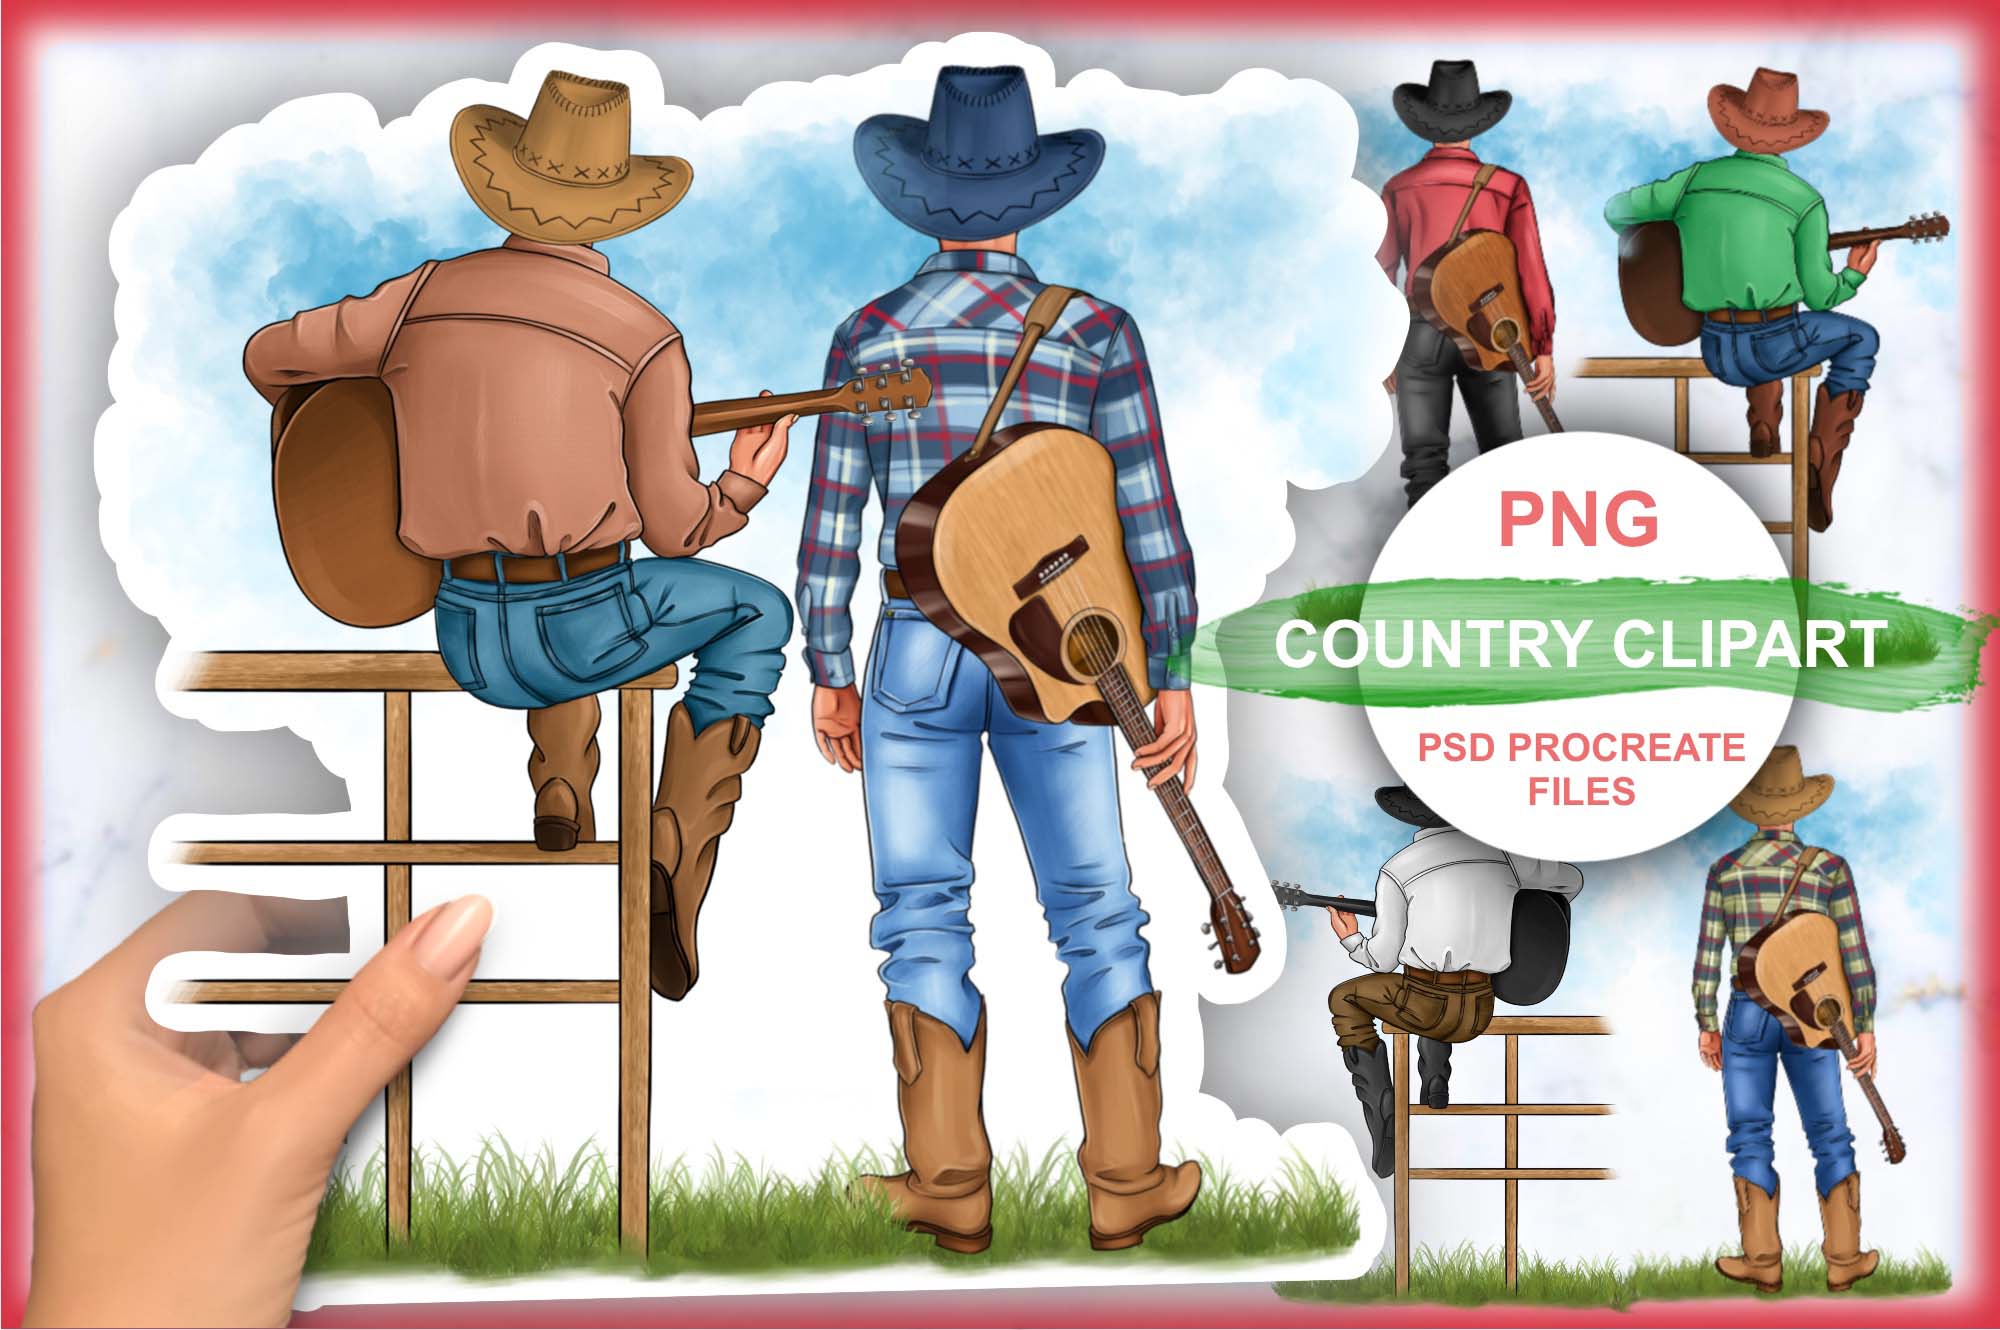 Best Friend Clipart And Country Clipart Facebook Image.